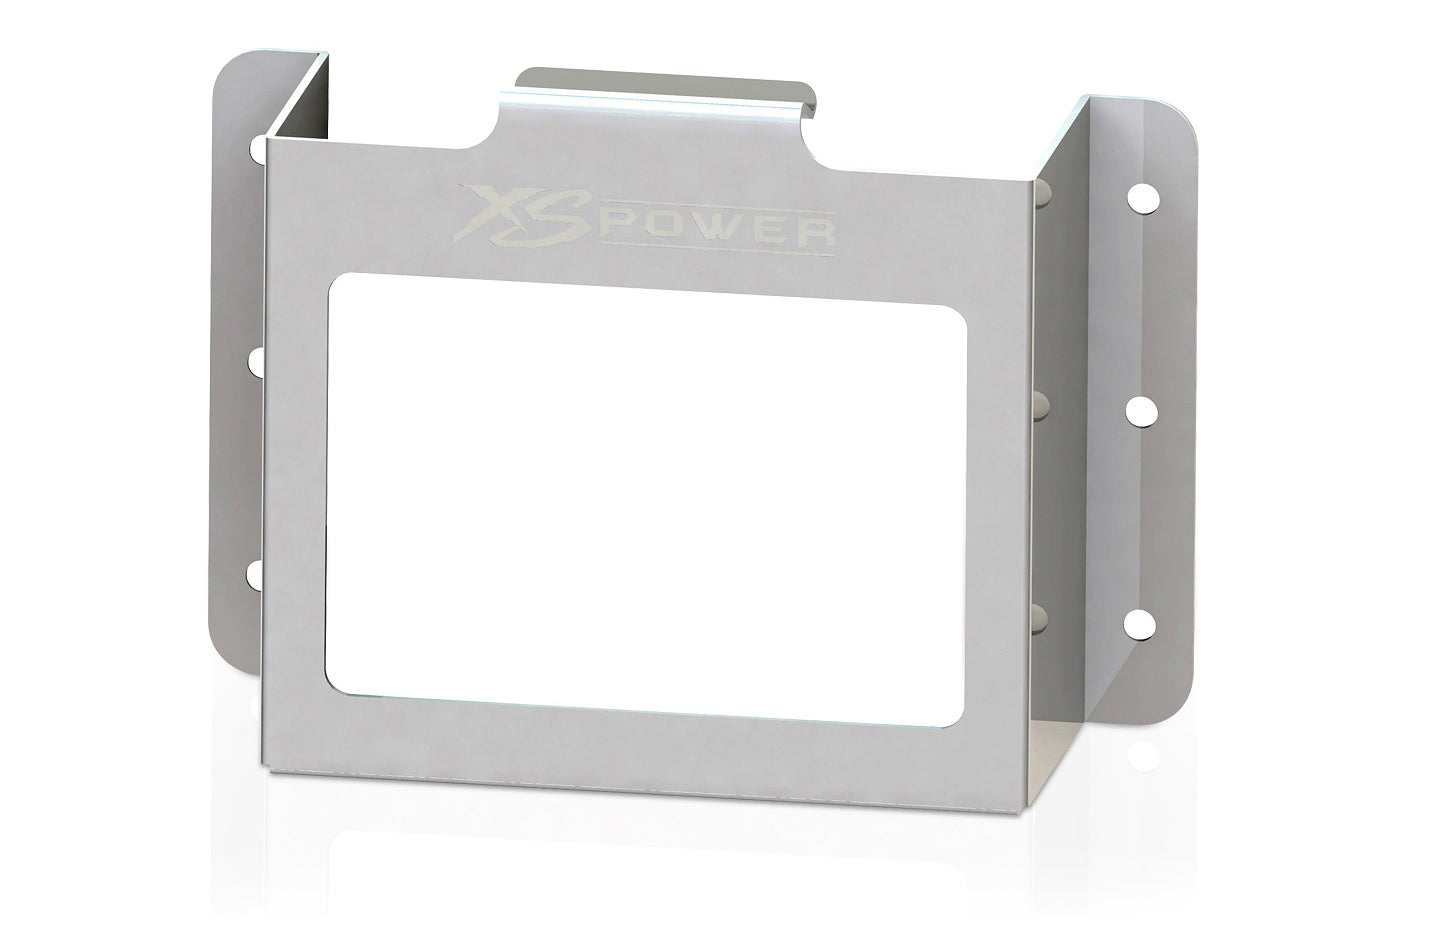 680 Series and XP750 Side Mount Box Window